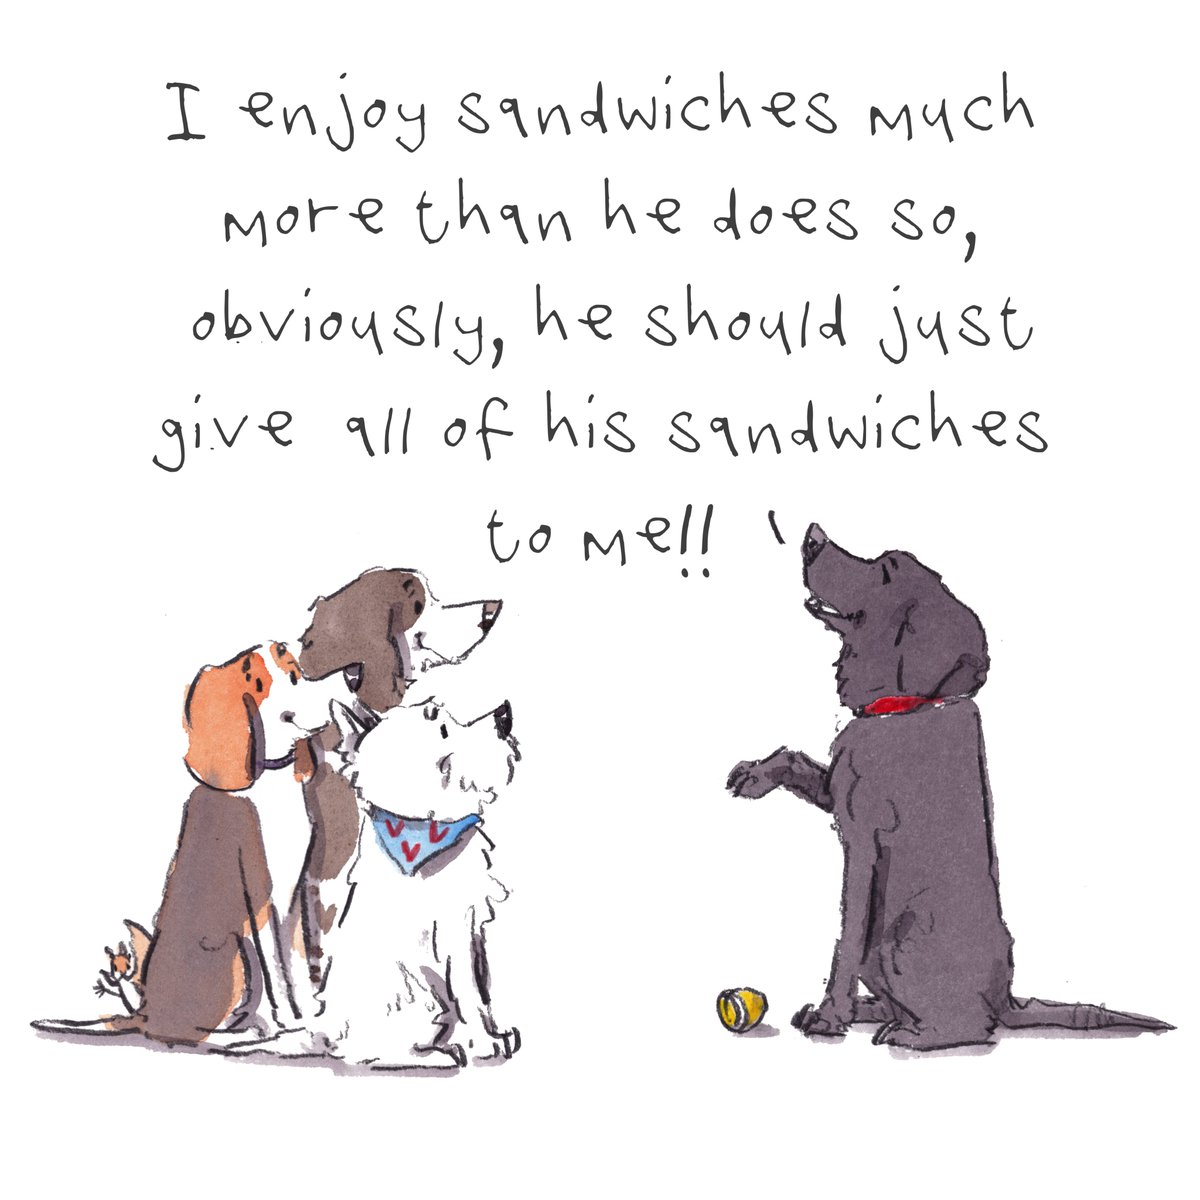 Good night, lovely people and lovely dogs. The lab has some strong views about sandwiches. Sleep well and sweet dreams. I hope that you have a really brilliant day tomorrow. #hoorayfordogs #beagle #westie #springer #labrador #redsquirrel